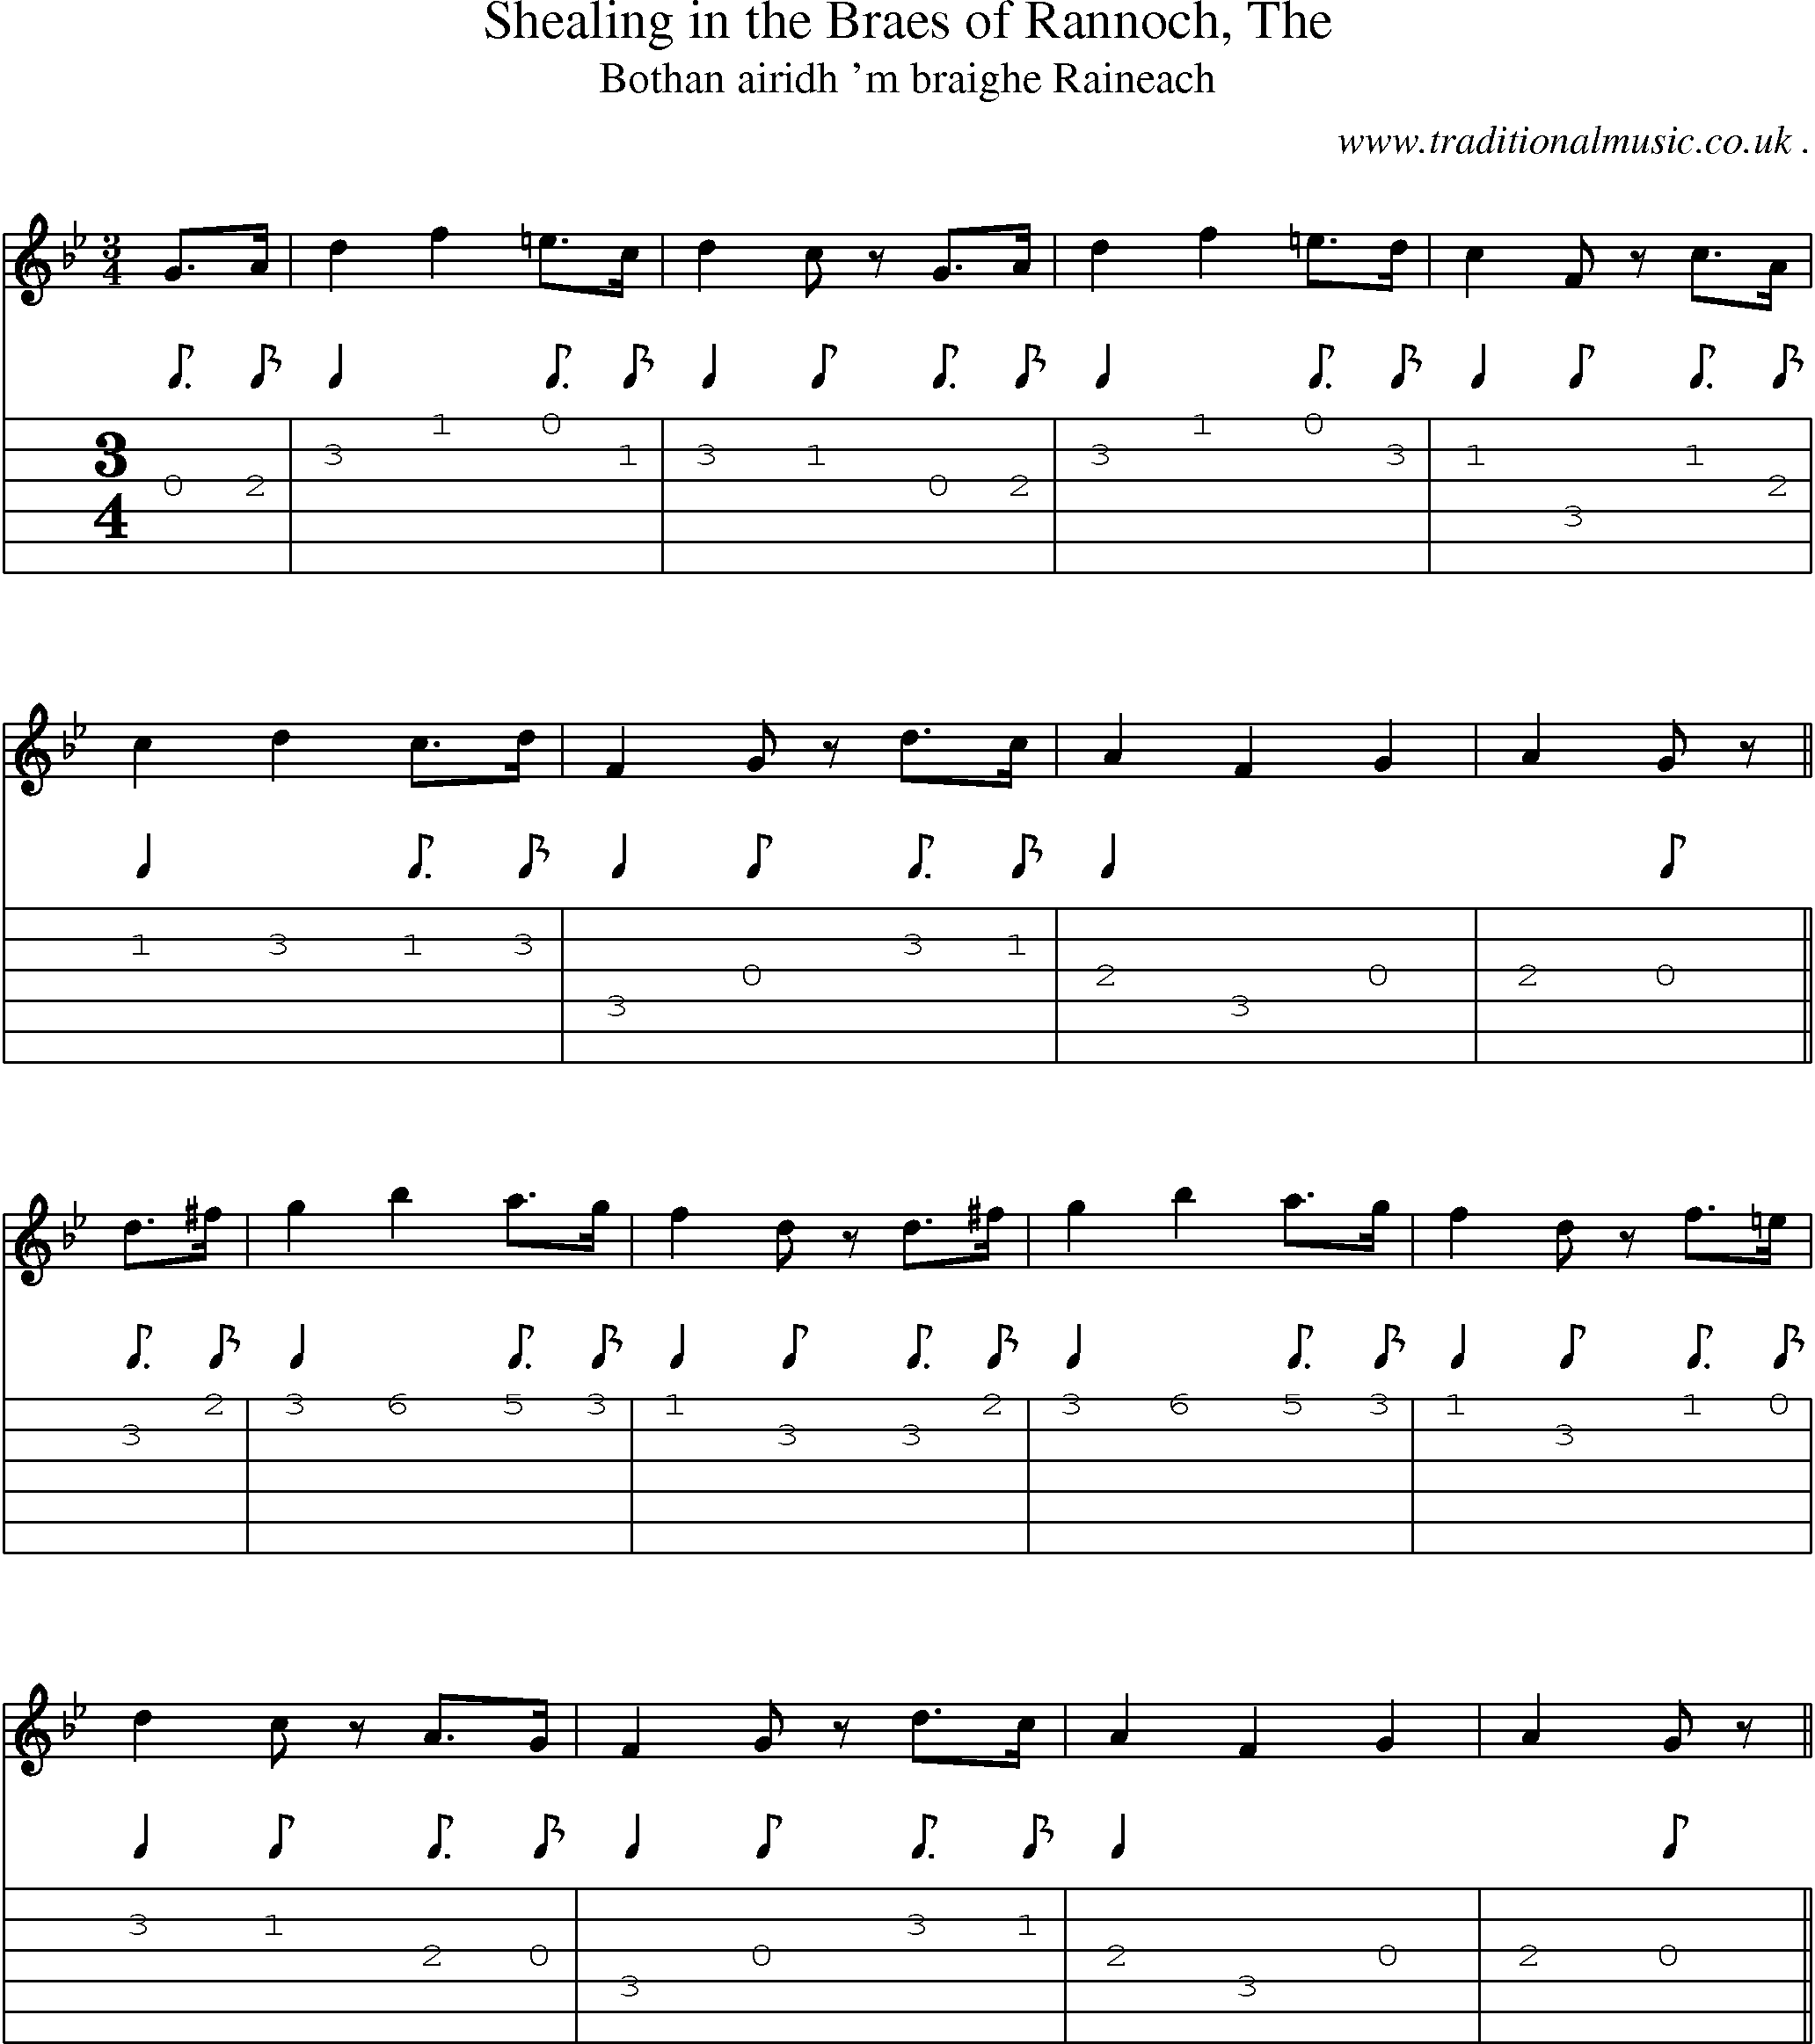 Sheet-music  score, Chords and Guitar Tabs for Shealing In The Braes Of Rannoch The